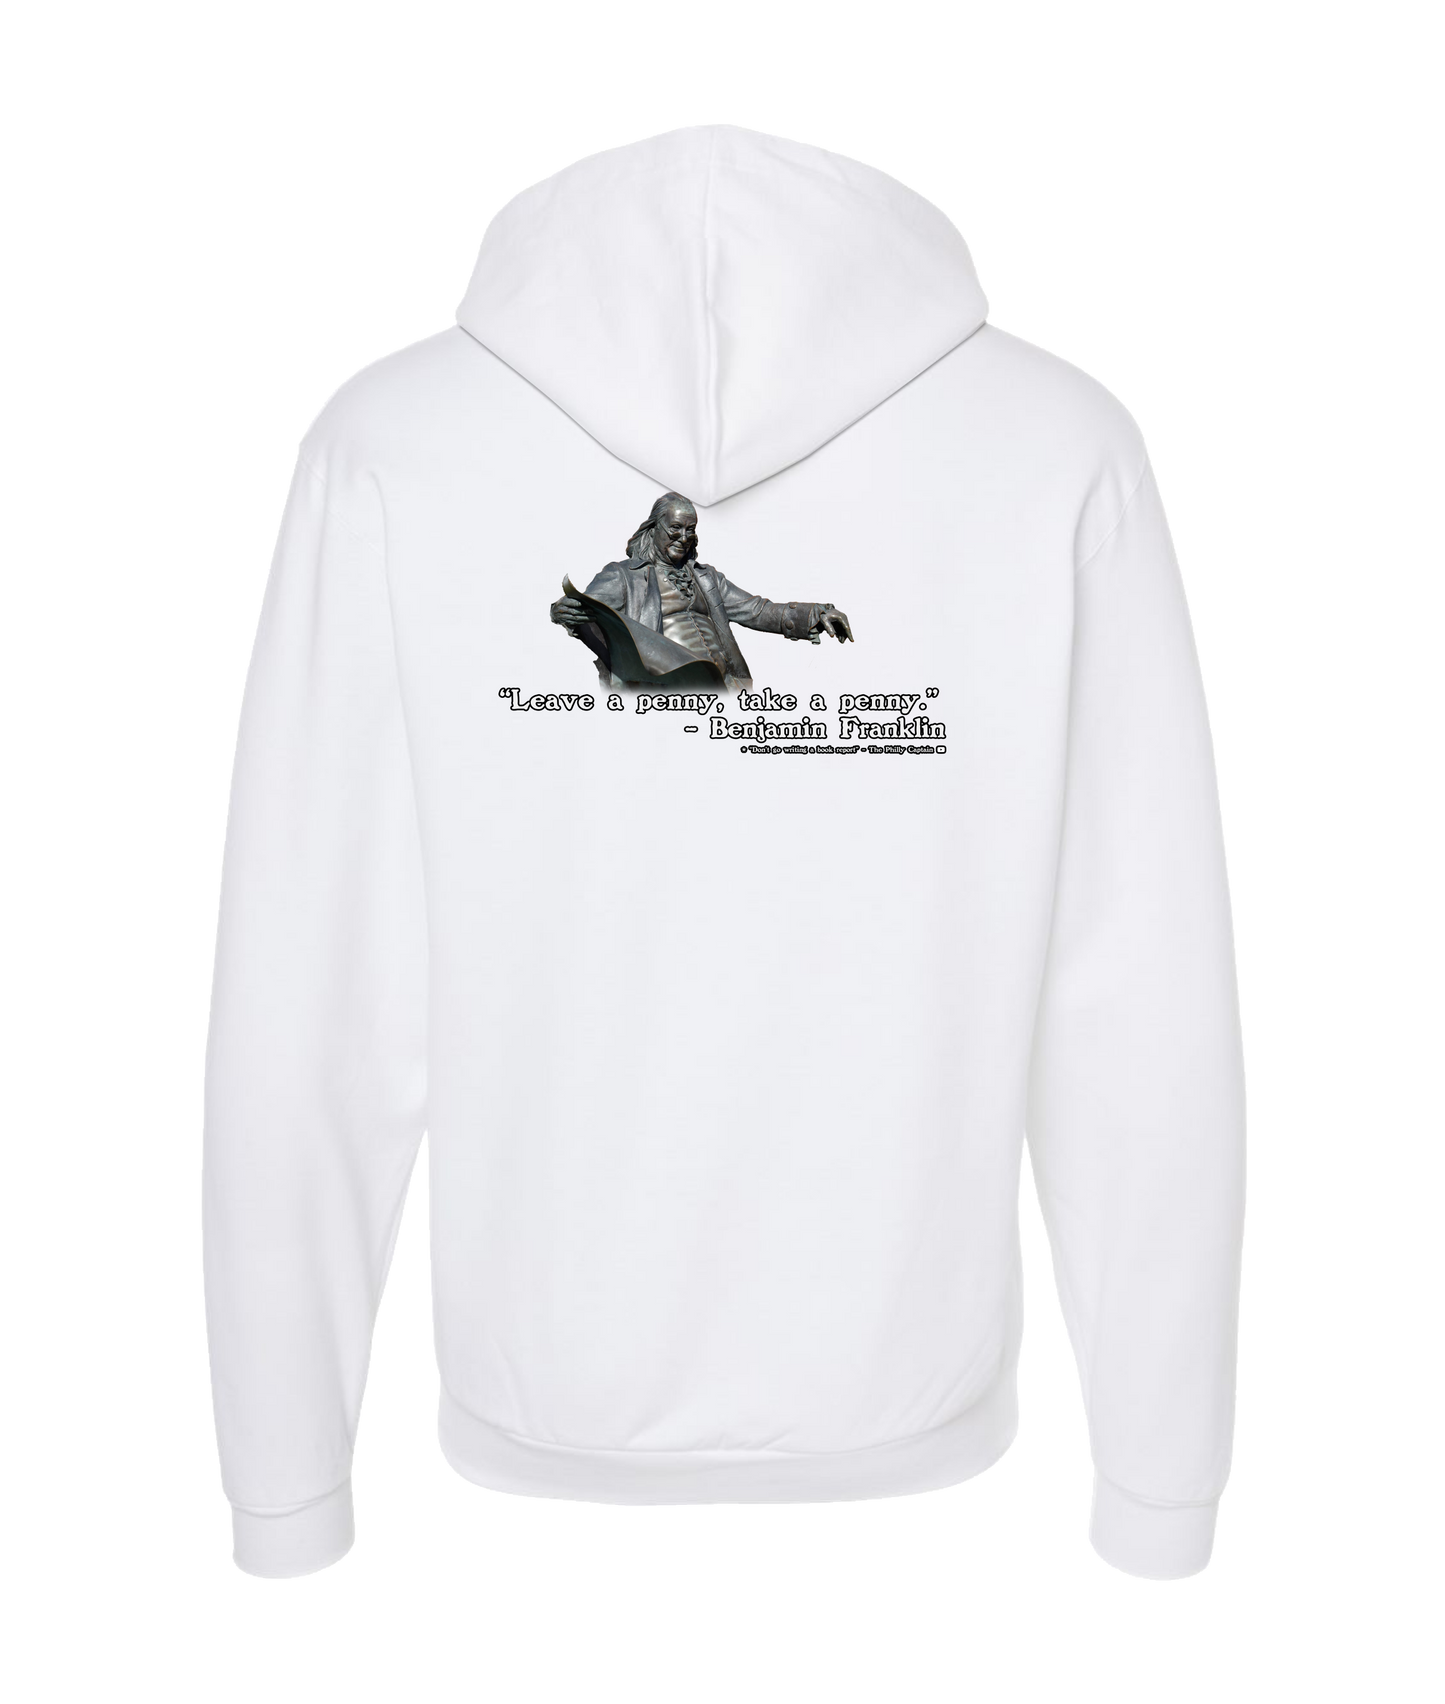 The Philly Captain's Merch is Fire - Leave a penny, take a penny - White Zip Up Hoodie